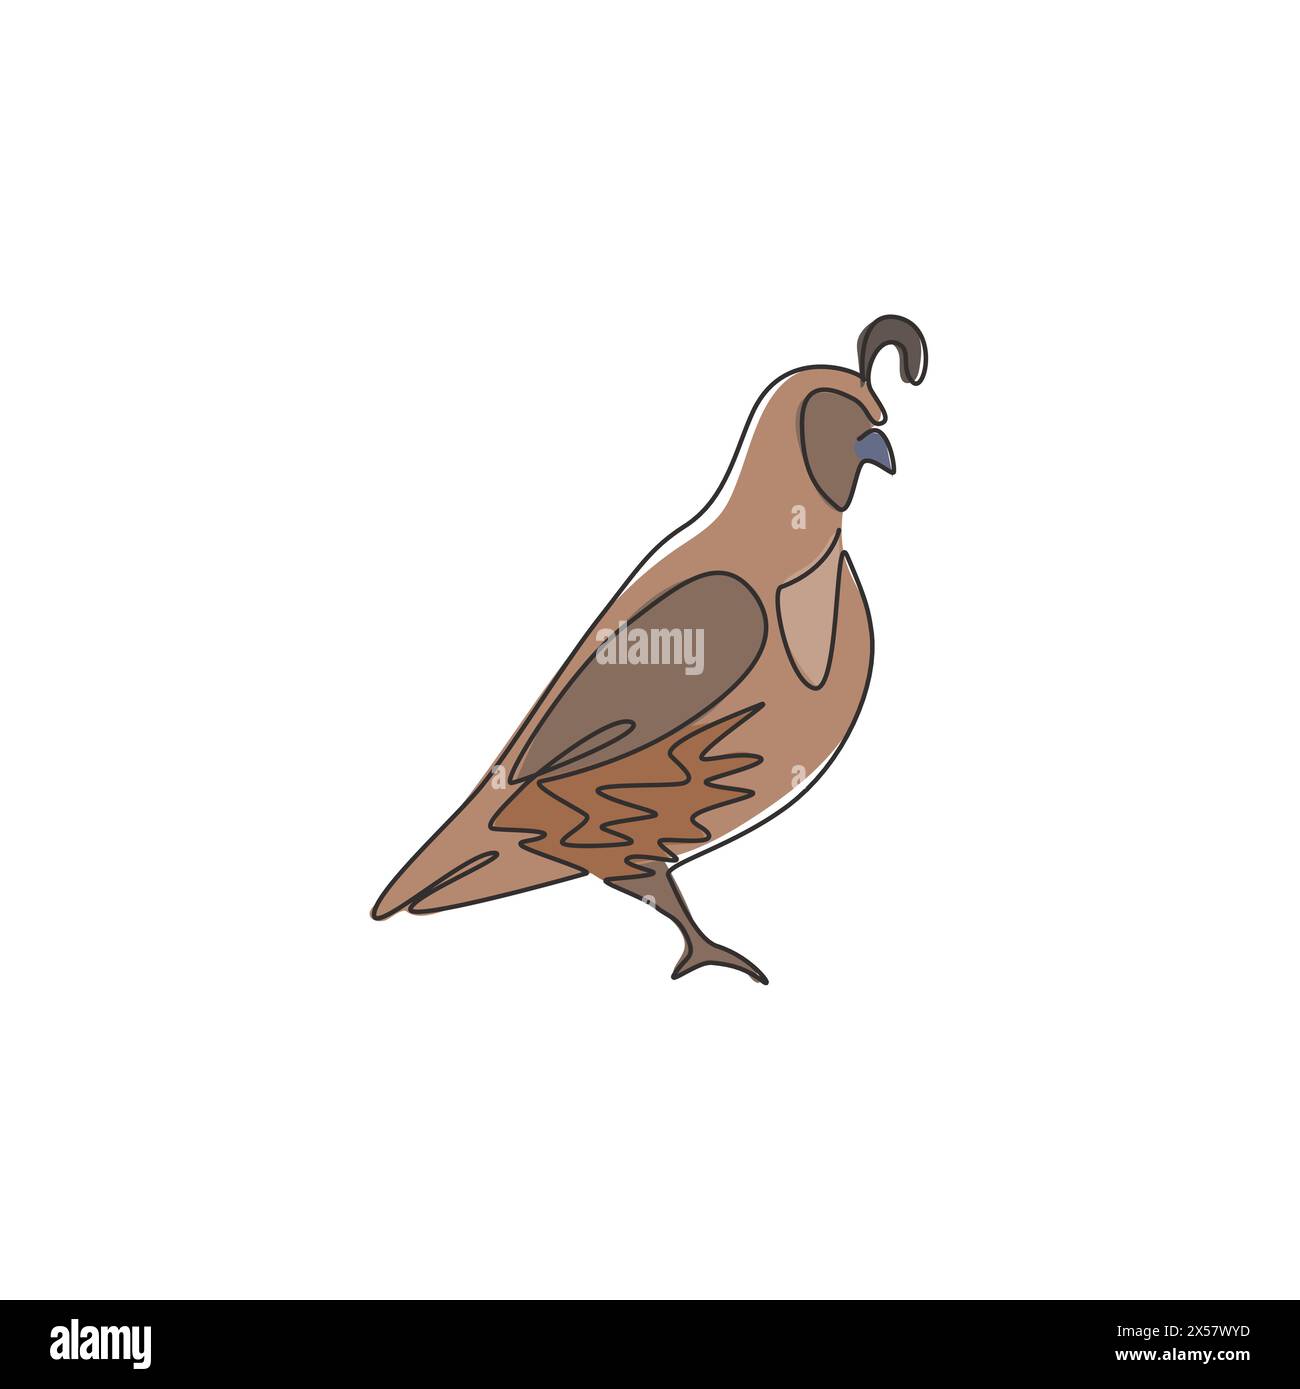 One continuous line drawing of cute California quail for farm logo identity. Highly sociable bird mascot concept for national park icon. Modern single Stock Vector